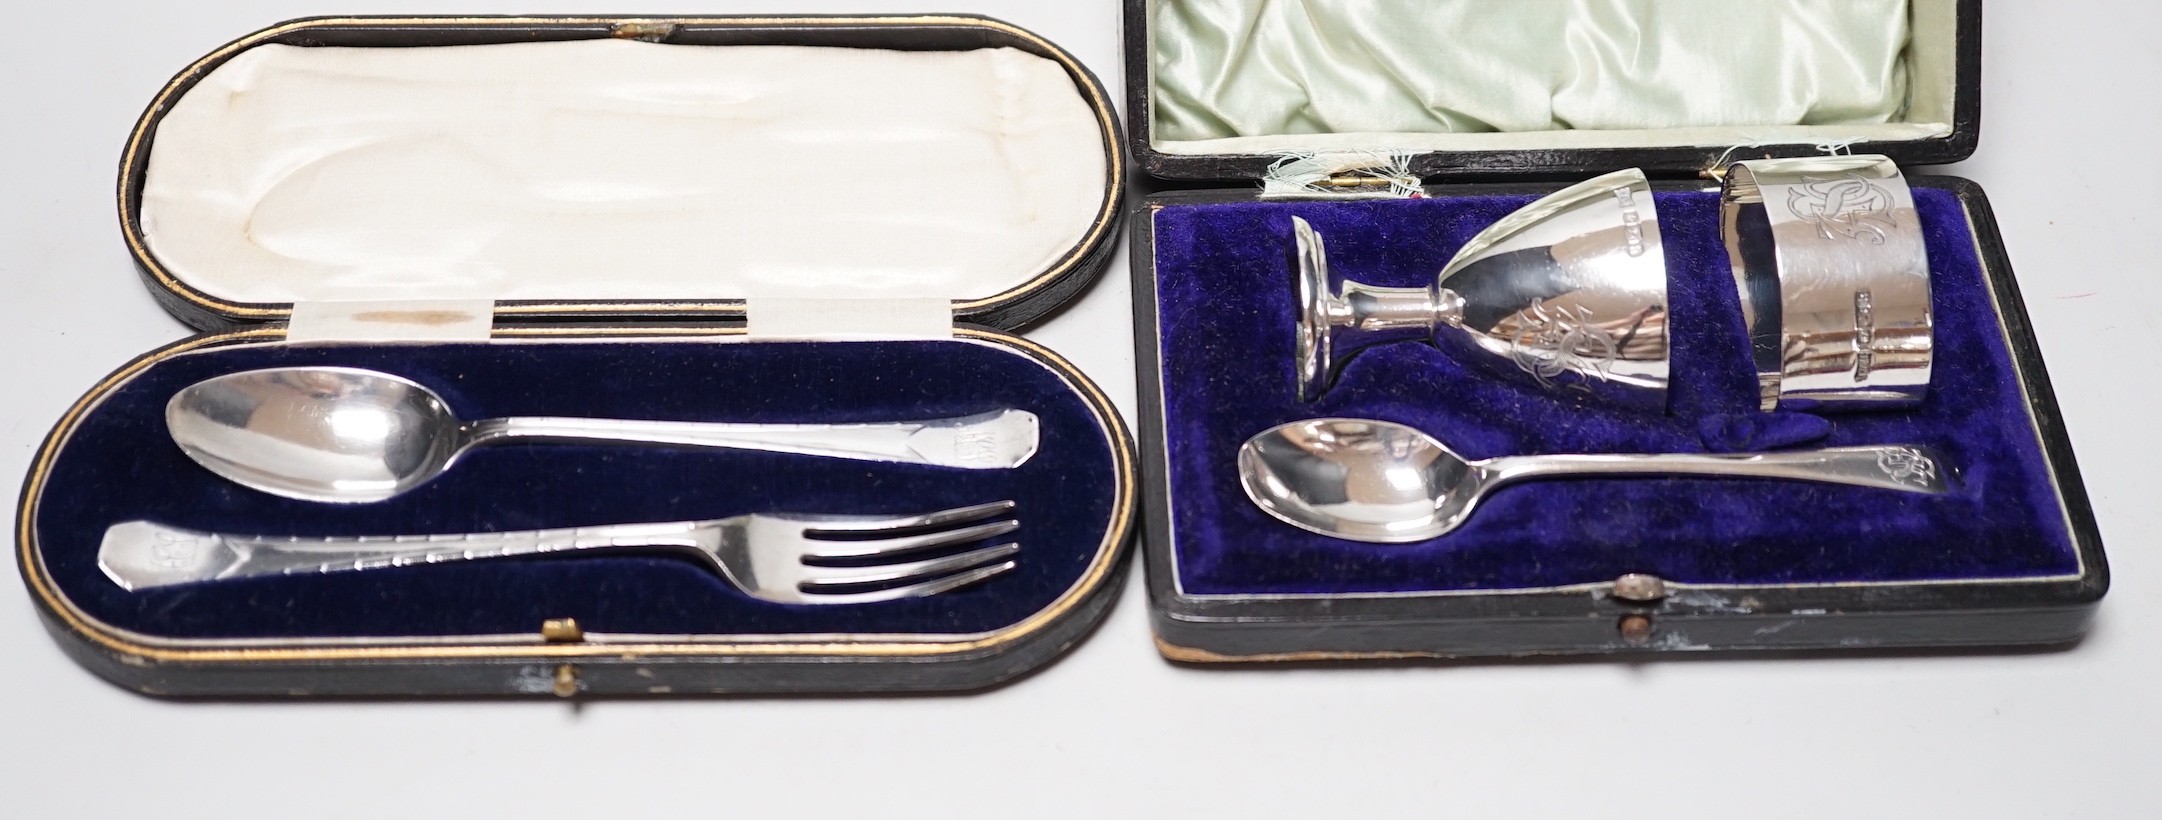 A cased George V silver christening trio, by Walker & Hall, Sheffield, 1925 and a cased silver christening spoon & fork, Henry Wigful, Sheffield, 1925.                                                                     